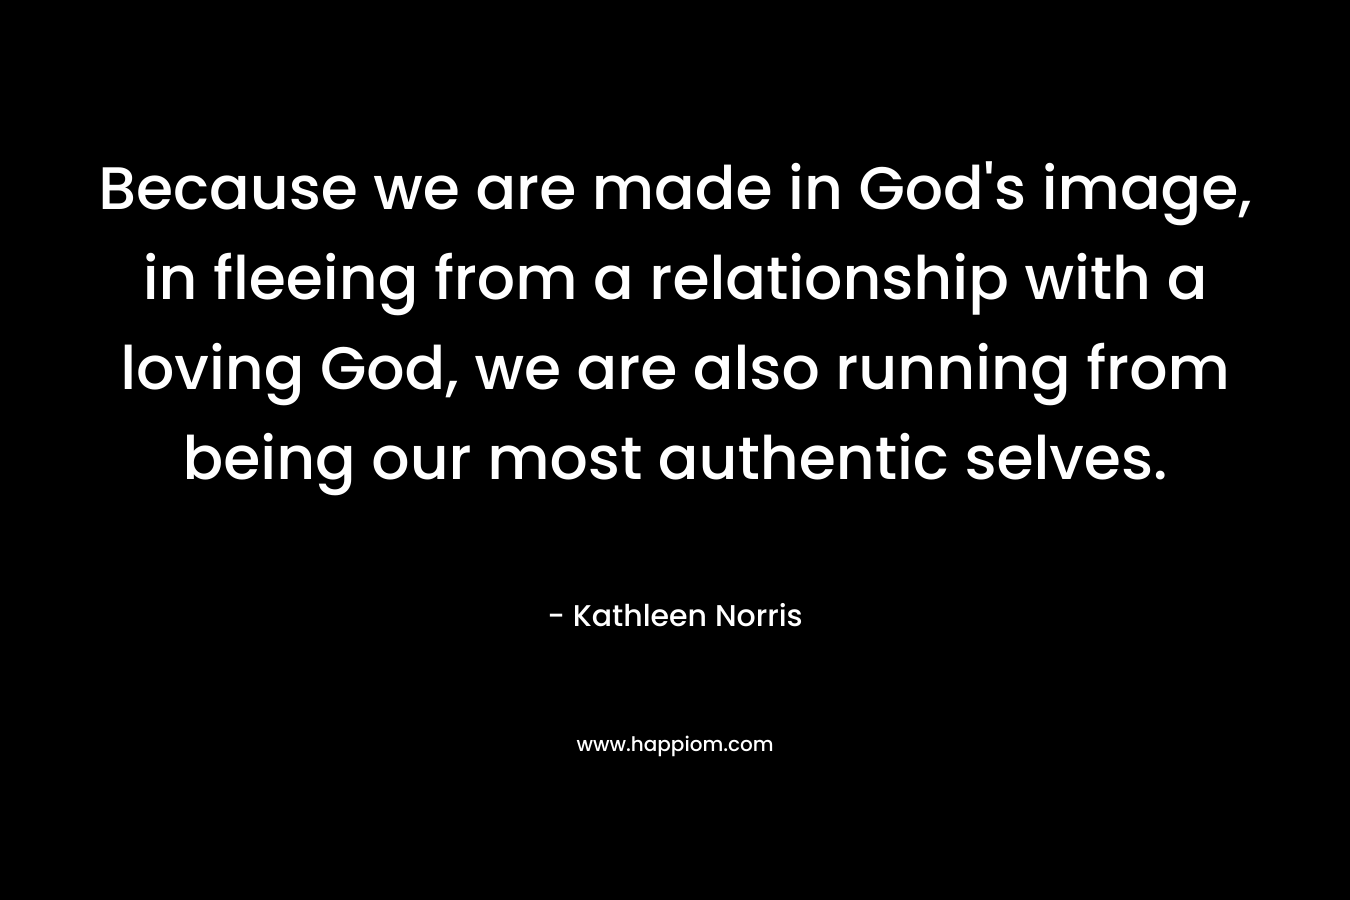 Because we are made in God's image, in fleeing from a relationship with a loving God, we are also running from being our most authentic selves.